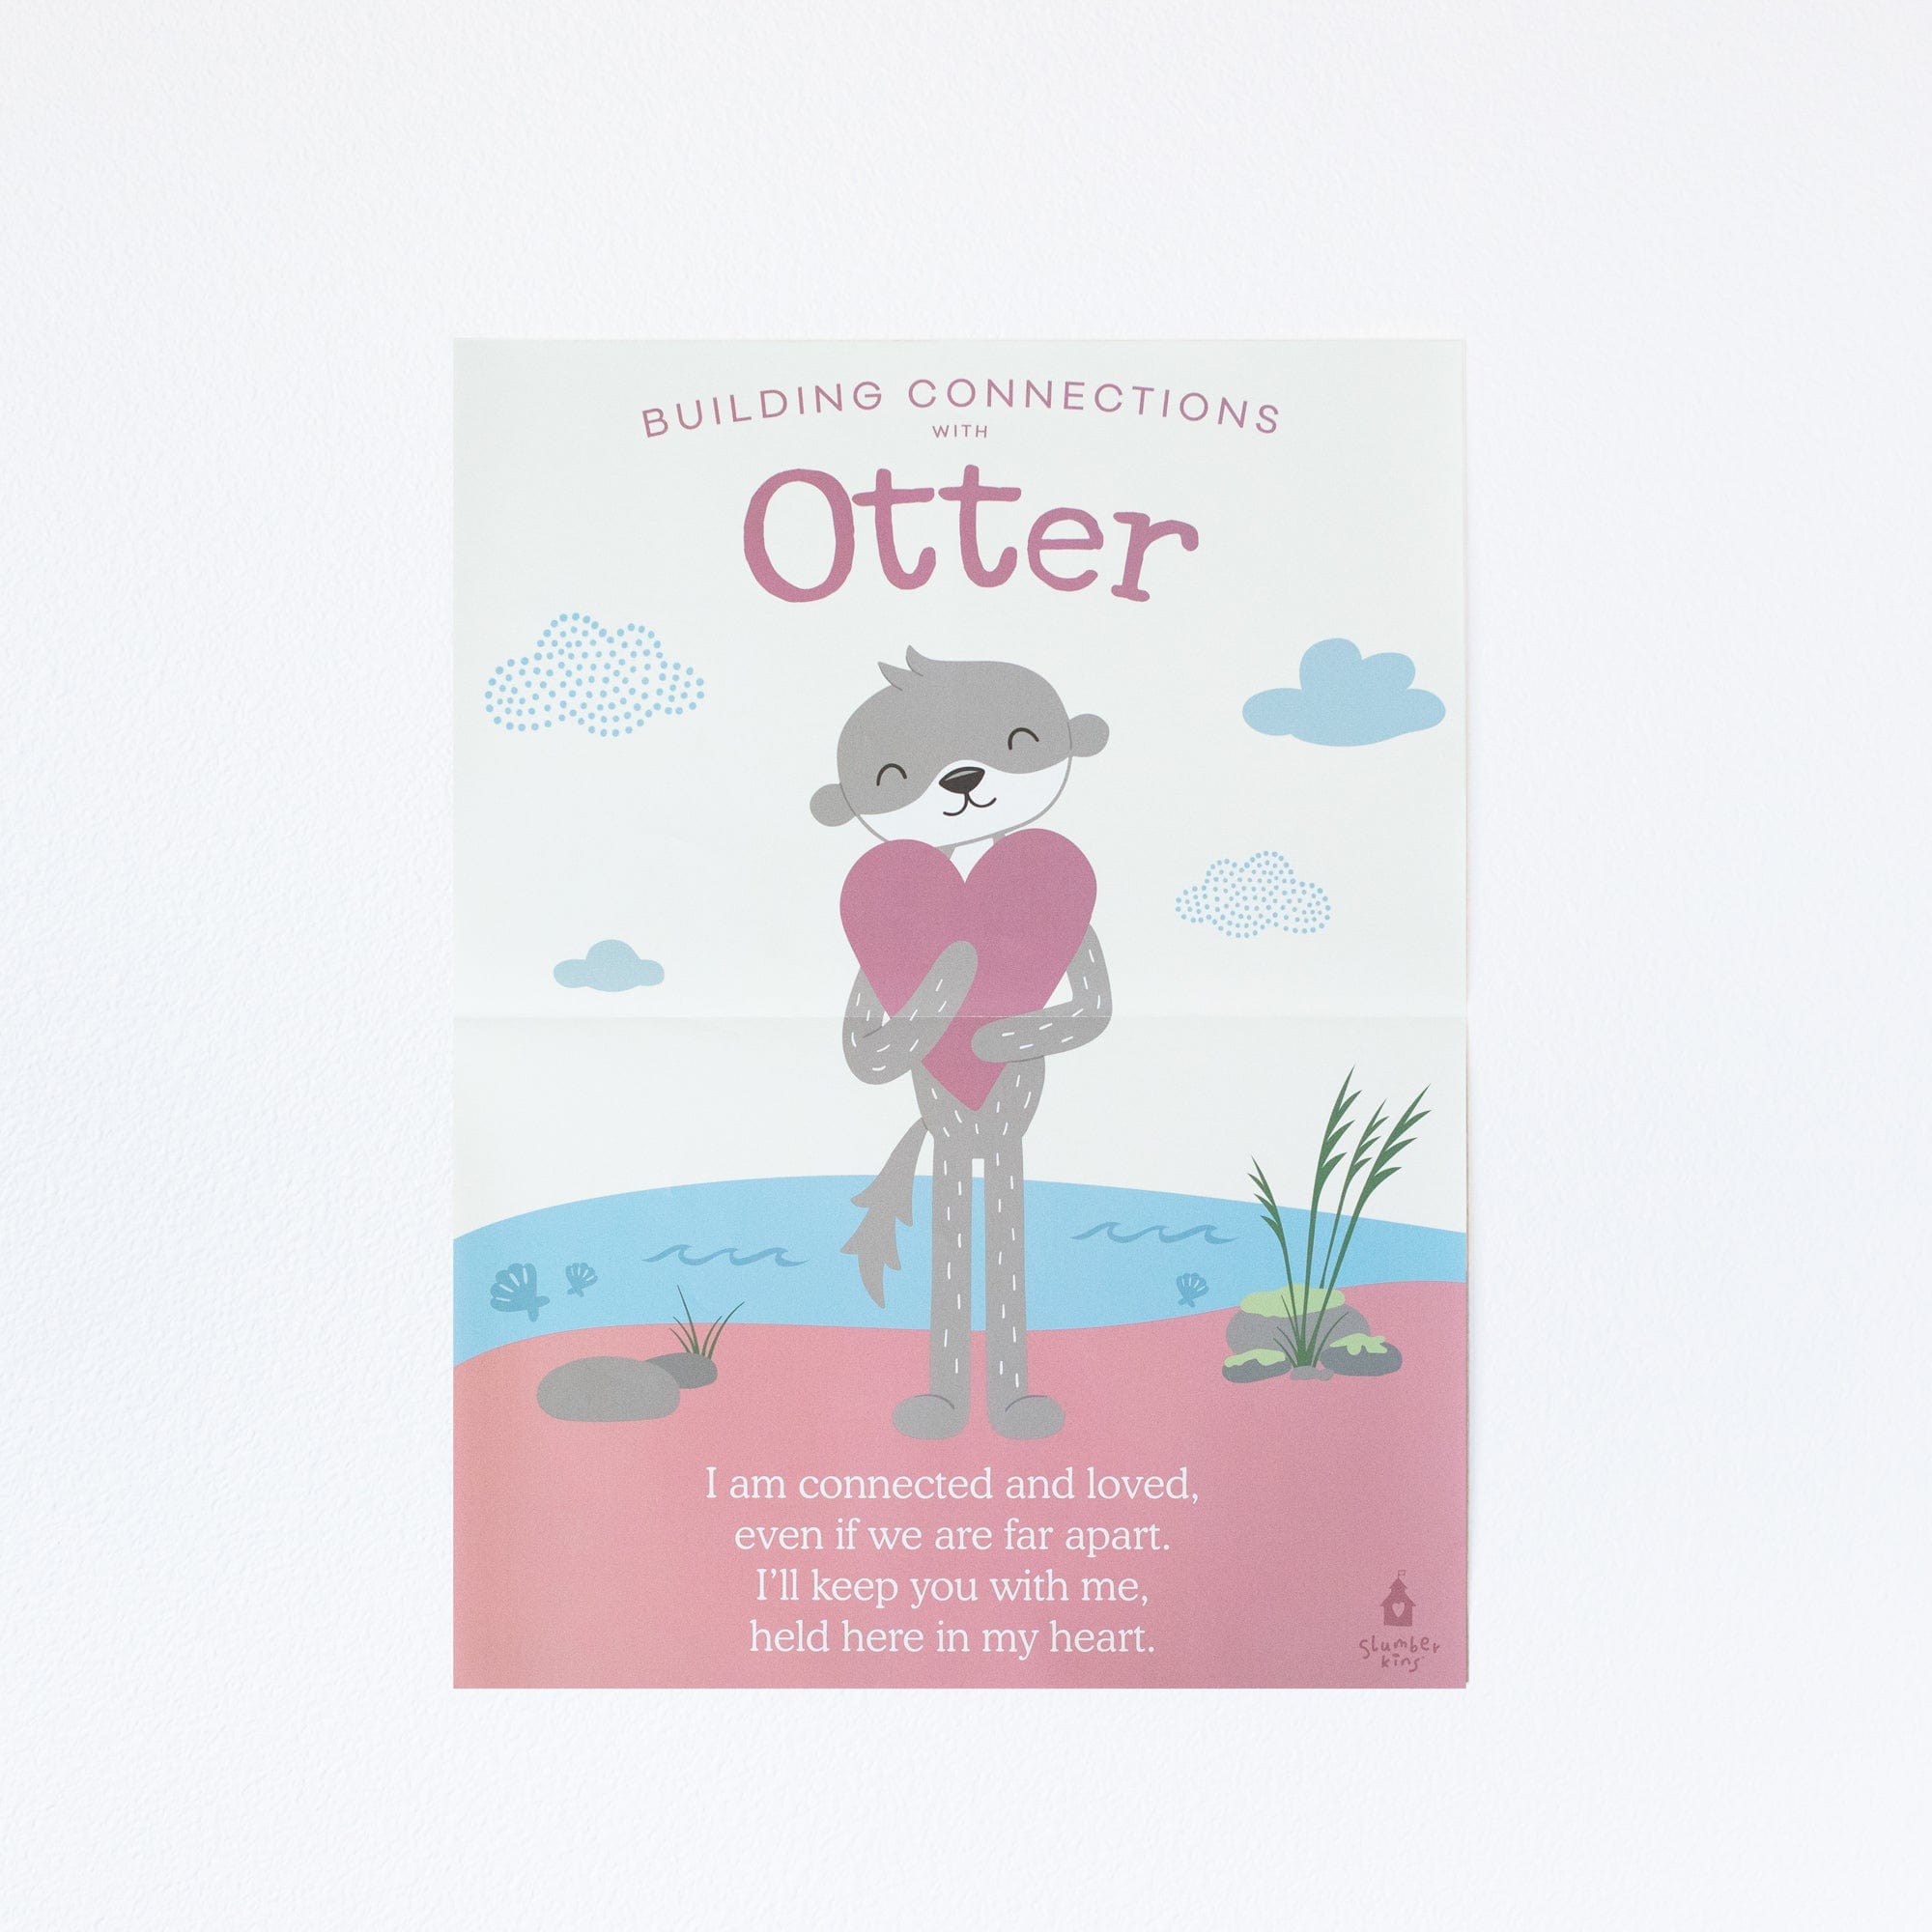 Affirmation Posters: Caring - View Product